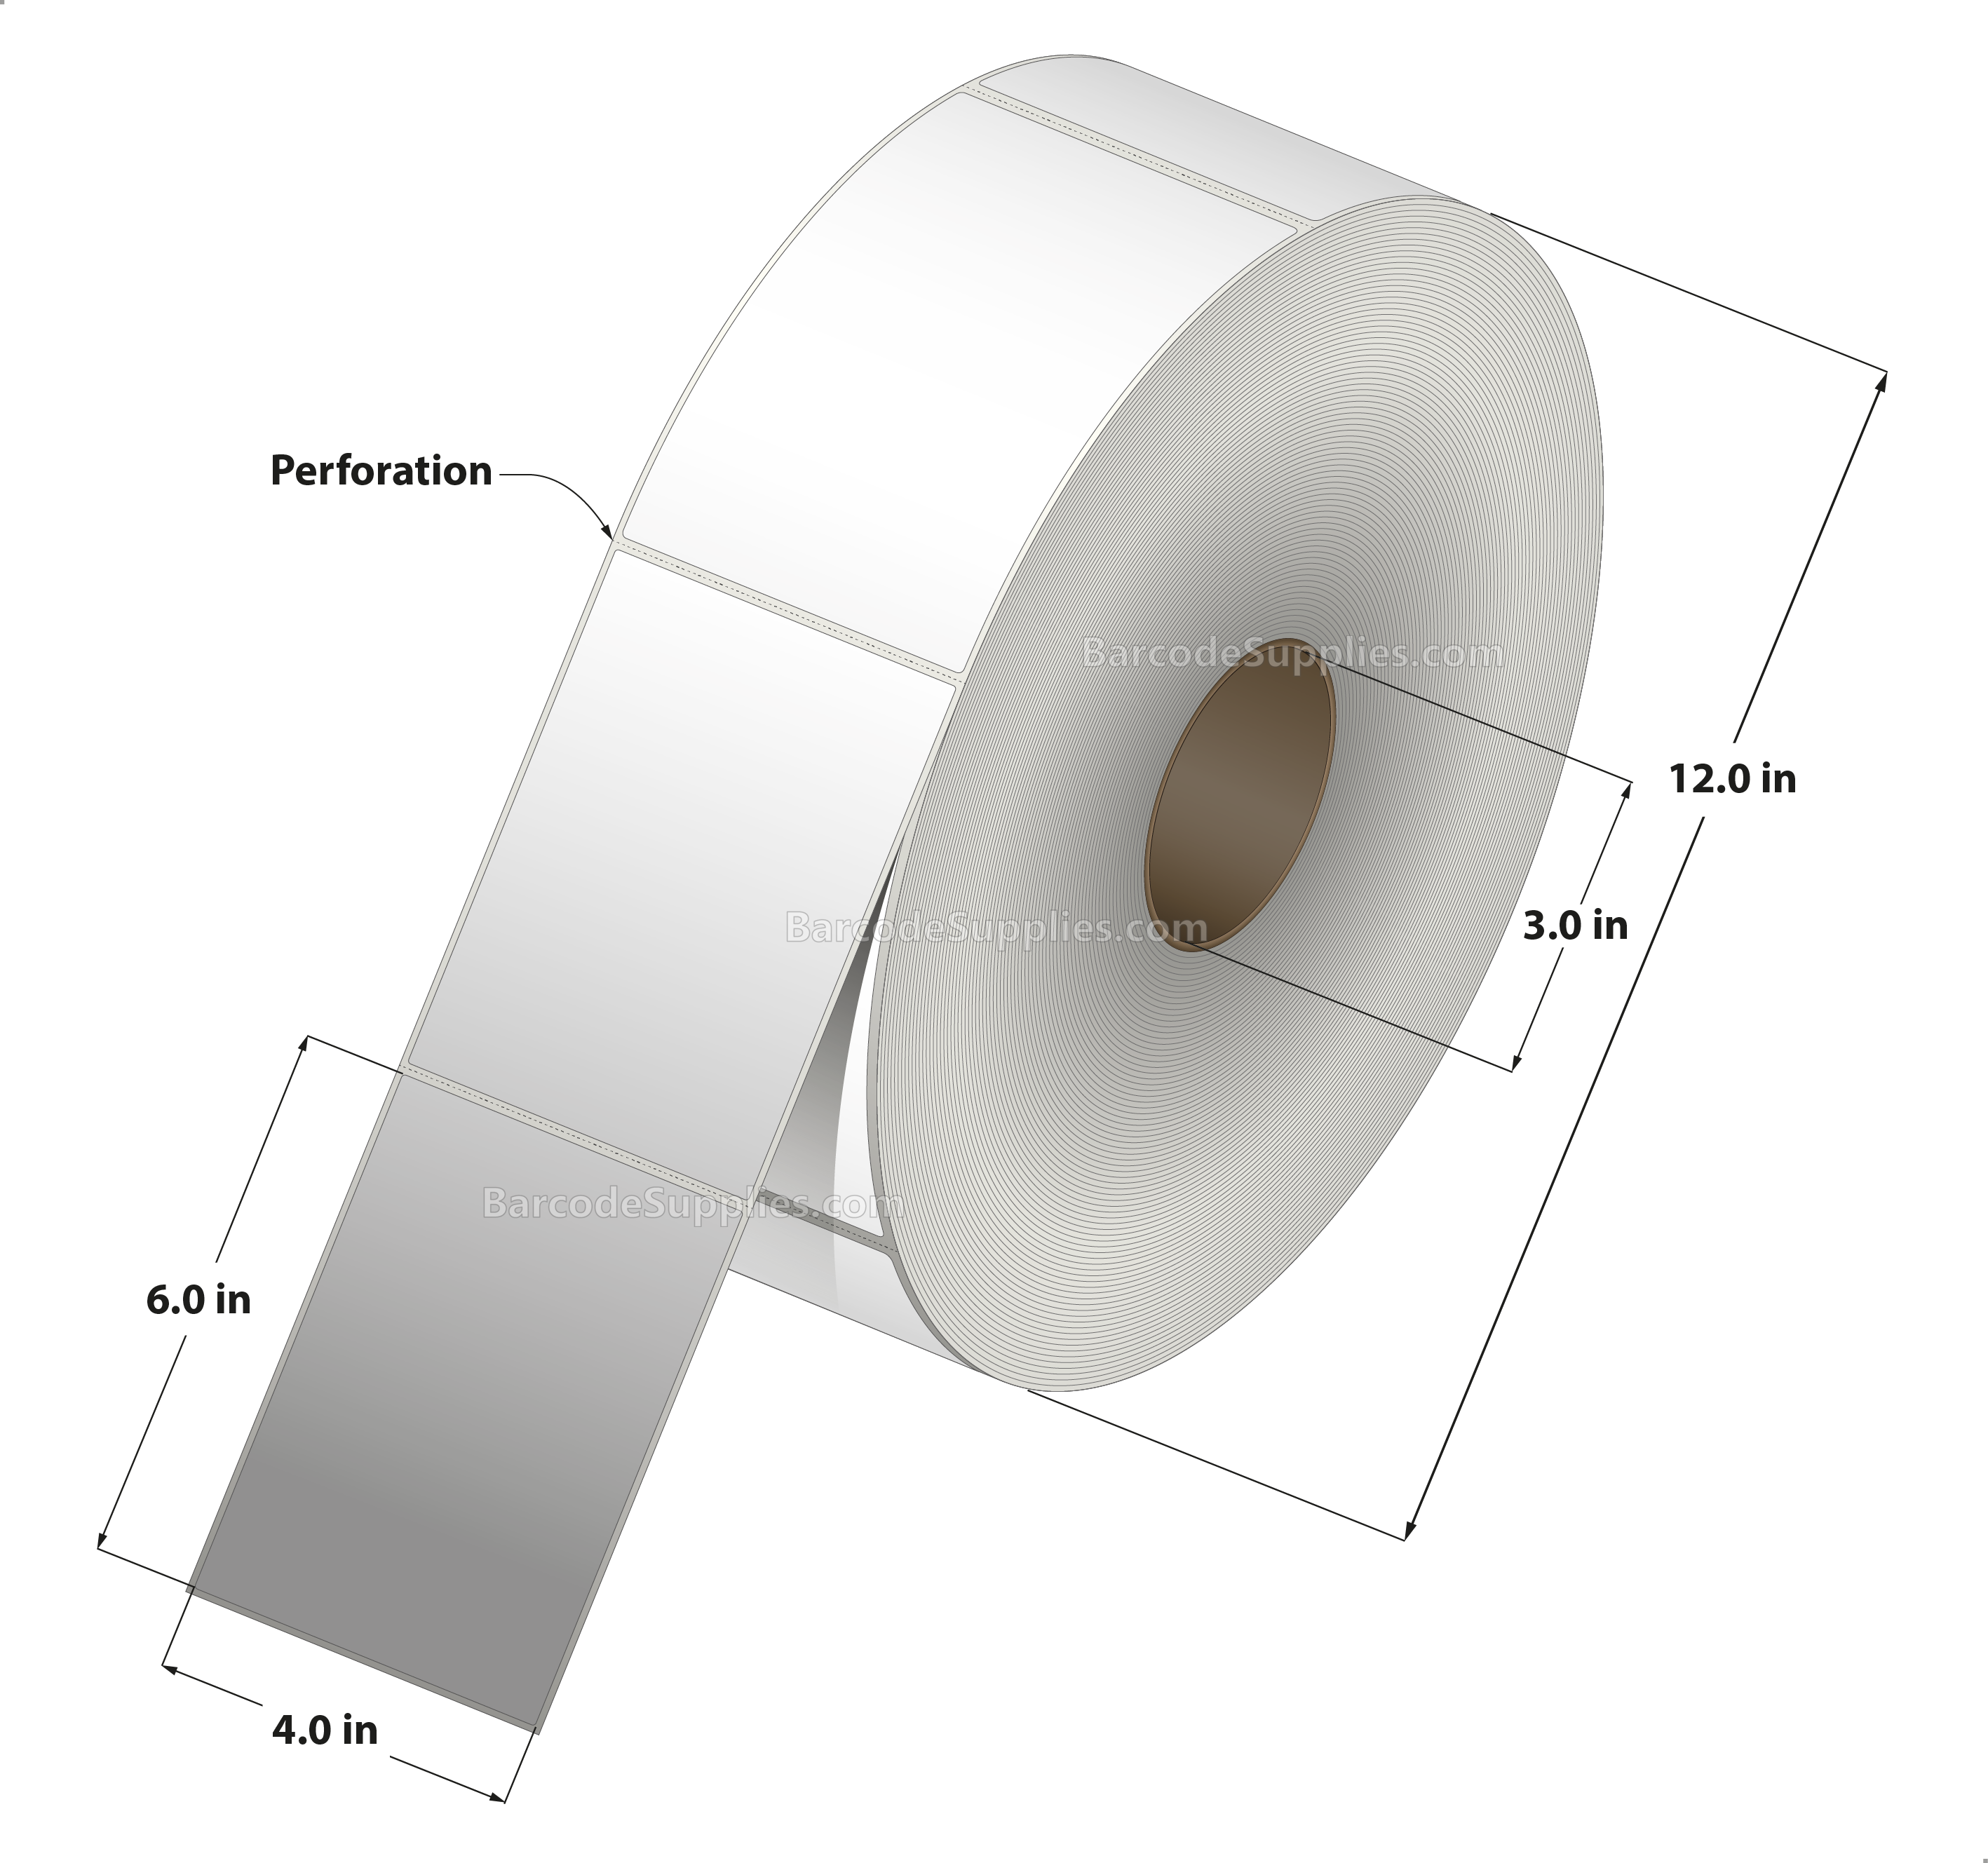 4 x 6 Thermal Transfer White Labels With Permanent Acrylic Adhesive - Perforated - 2800 Labels Per Roll - Carton Of 2 Rolls - 5600 Labels Total - MPN: TH46-112